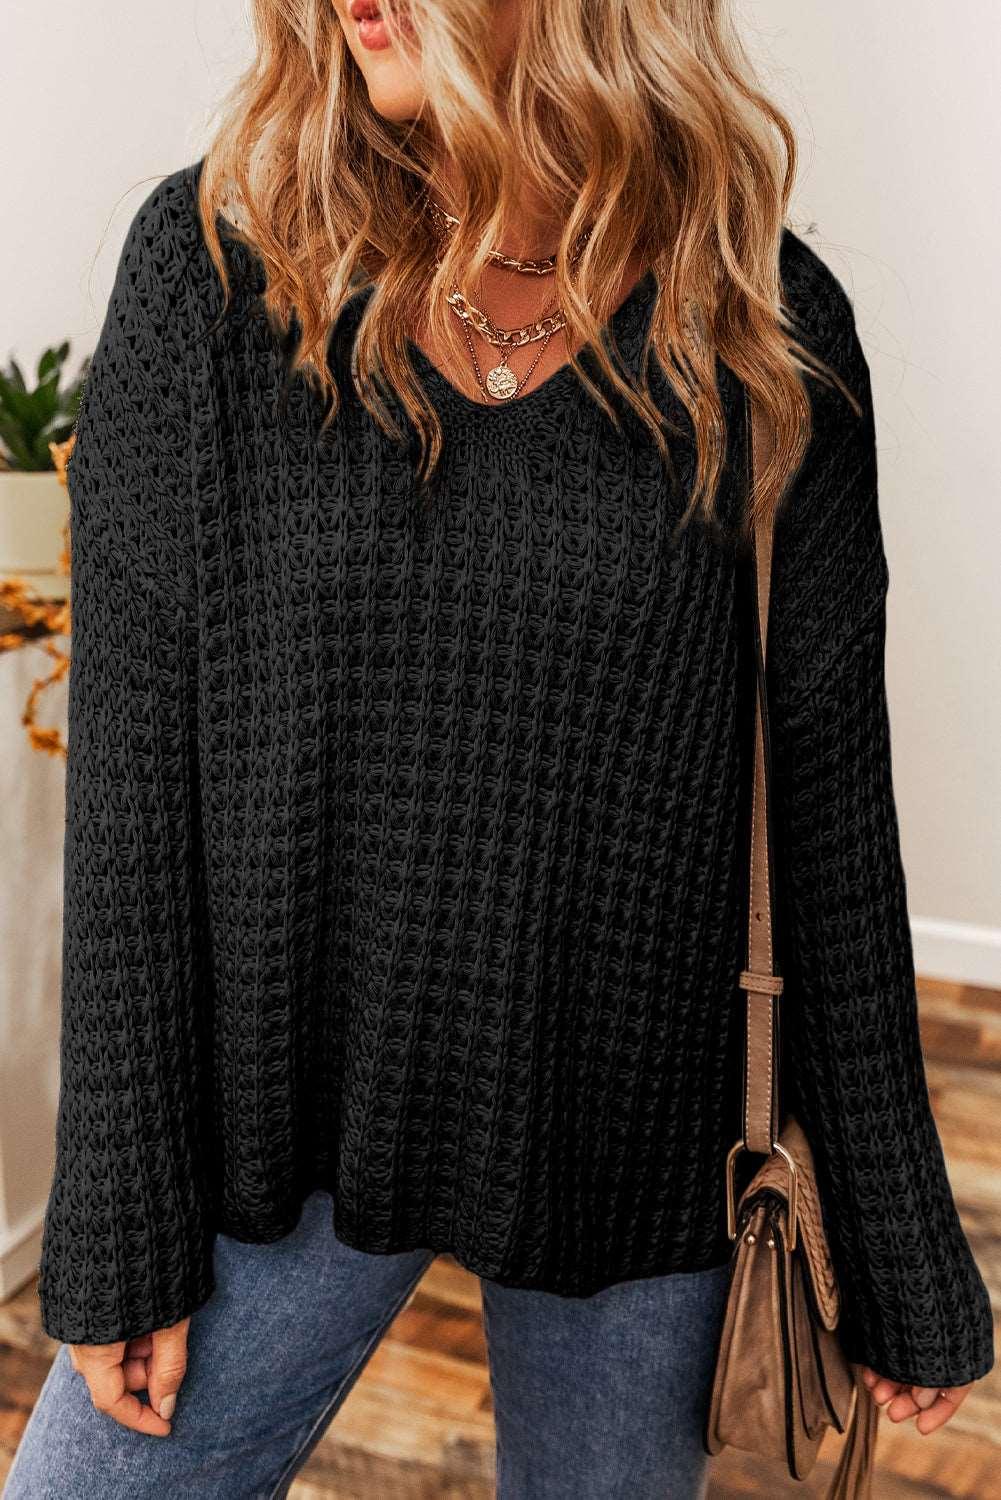 Crocheted V-Neck Hollow Sweater